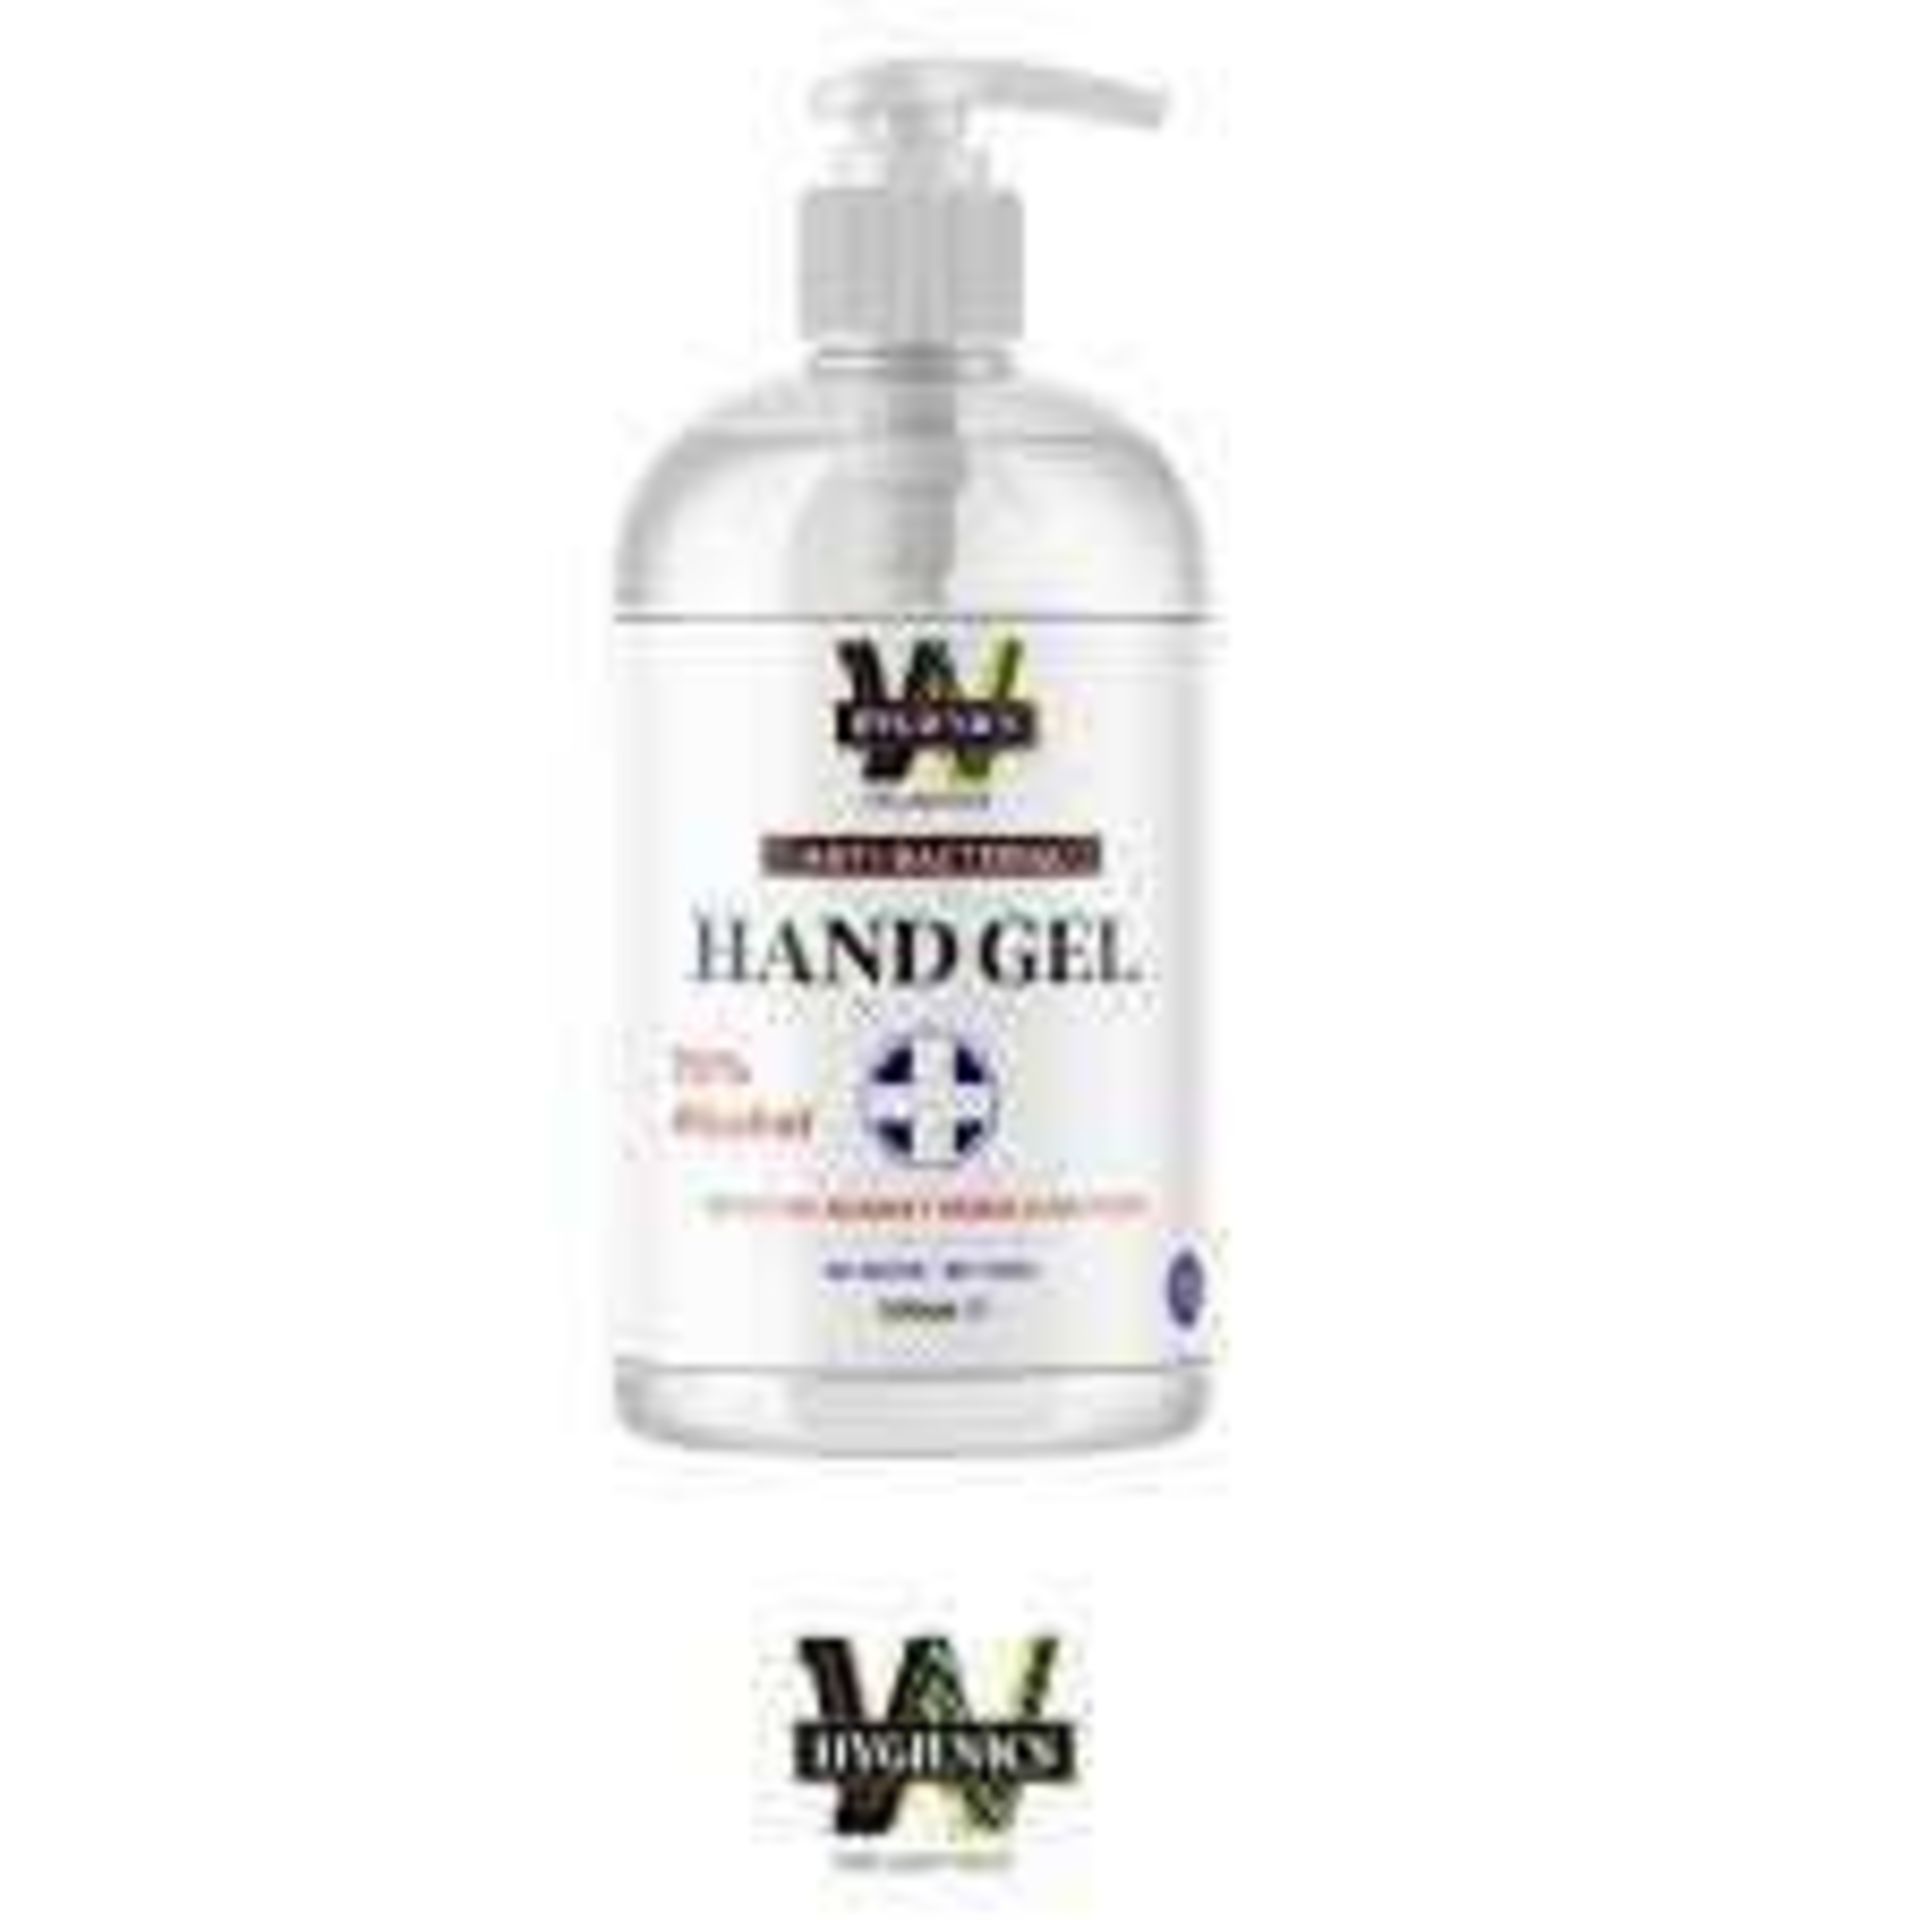 RRP £350 Box To Contain 35 Wellington Anti Bacterial Hand Gel 500Ml Bottles - Image 2 of 2